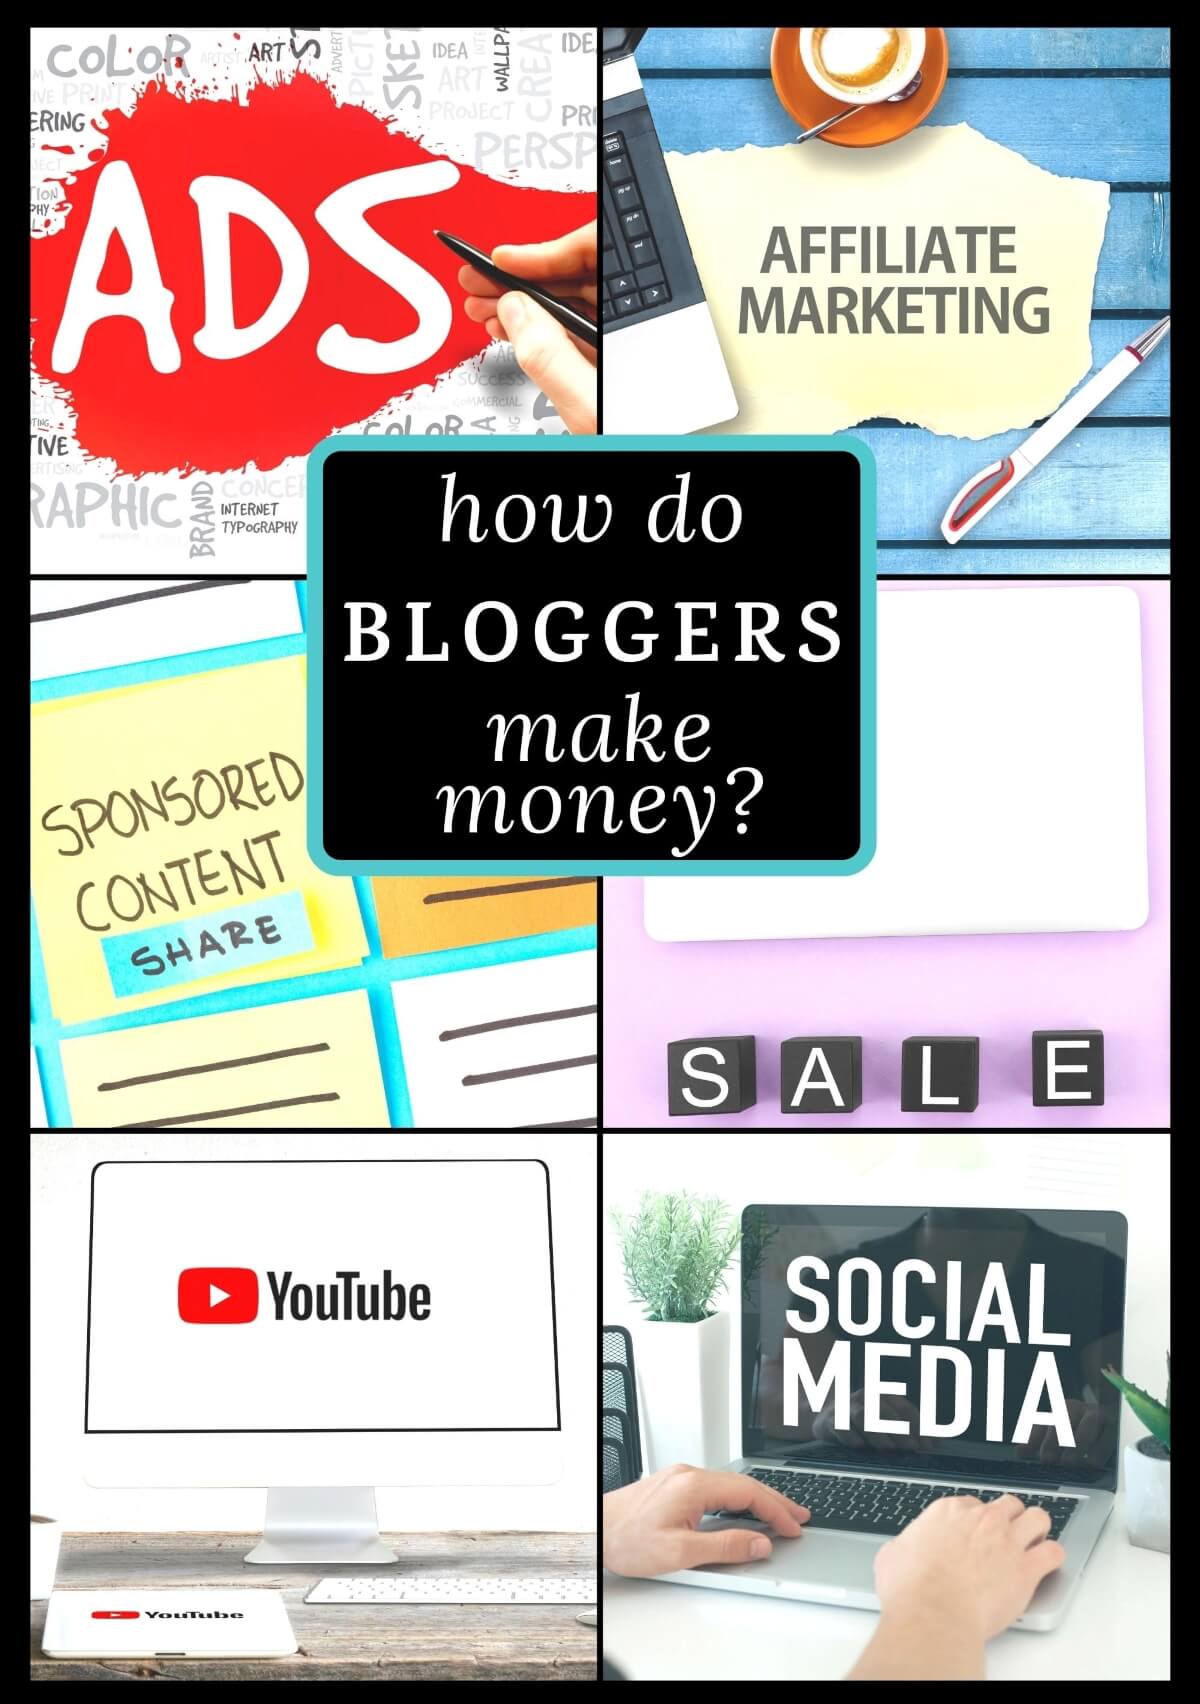 Several images with the text "how do bloggers make money" and pictures that say "ads, social media, youtube, sale, sponsored content, affiliate marketing."